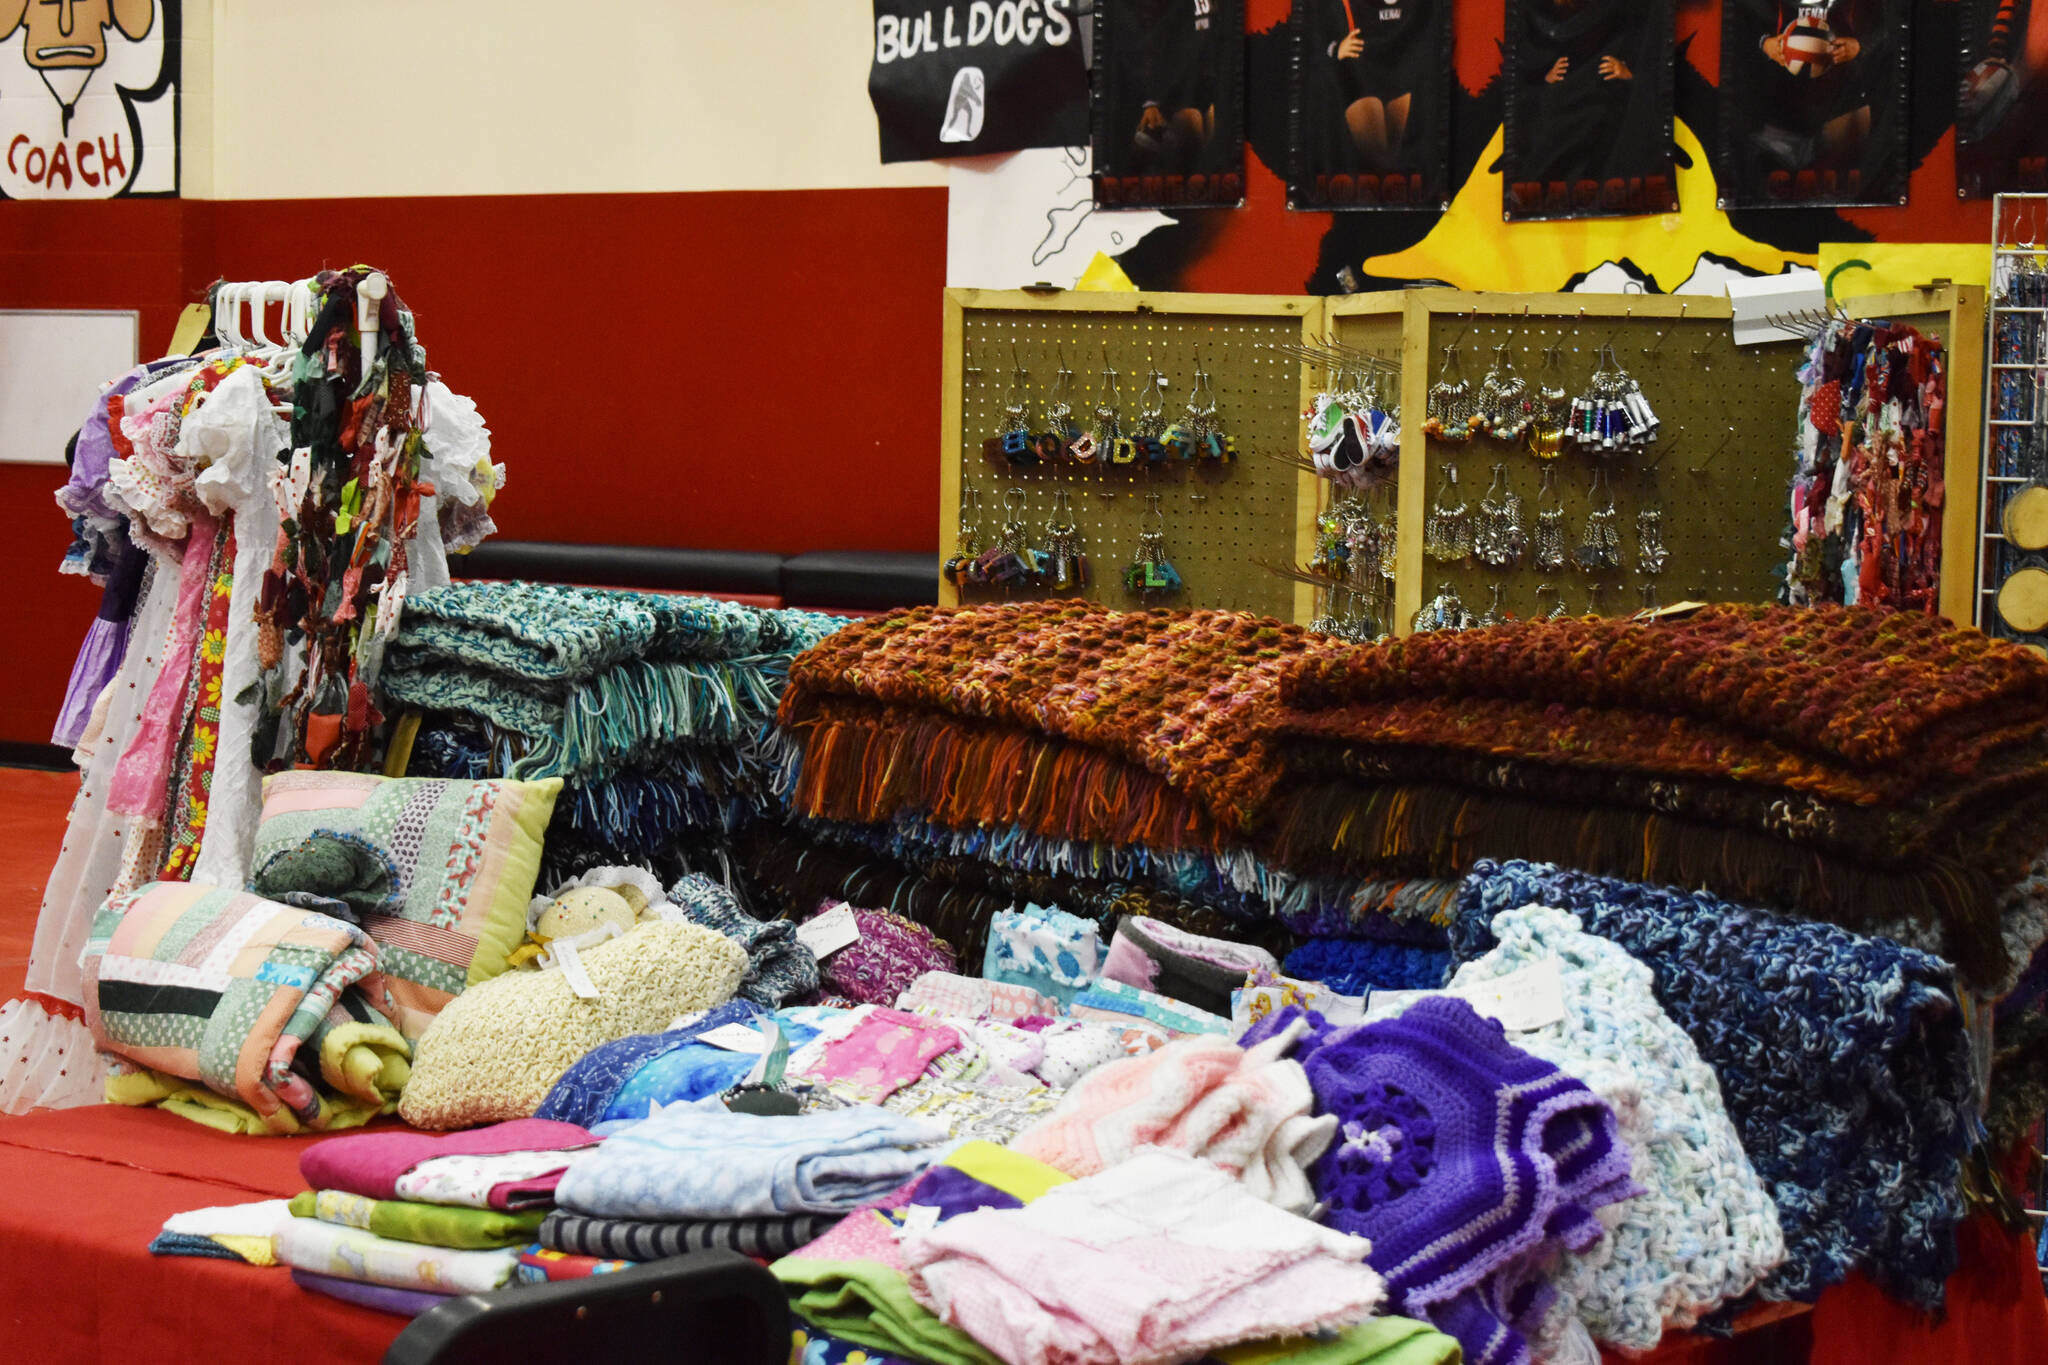 Blankets and other knitted and handmade fabric products are displayed ready for sale prior to the Kenai Arts & Crafts Fair during early set up at Kenai Central High School in Kenai, Alaska on Wednesday, November 23, 2022.  (Jake Dye / Clarion Peninsula)